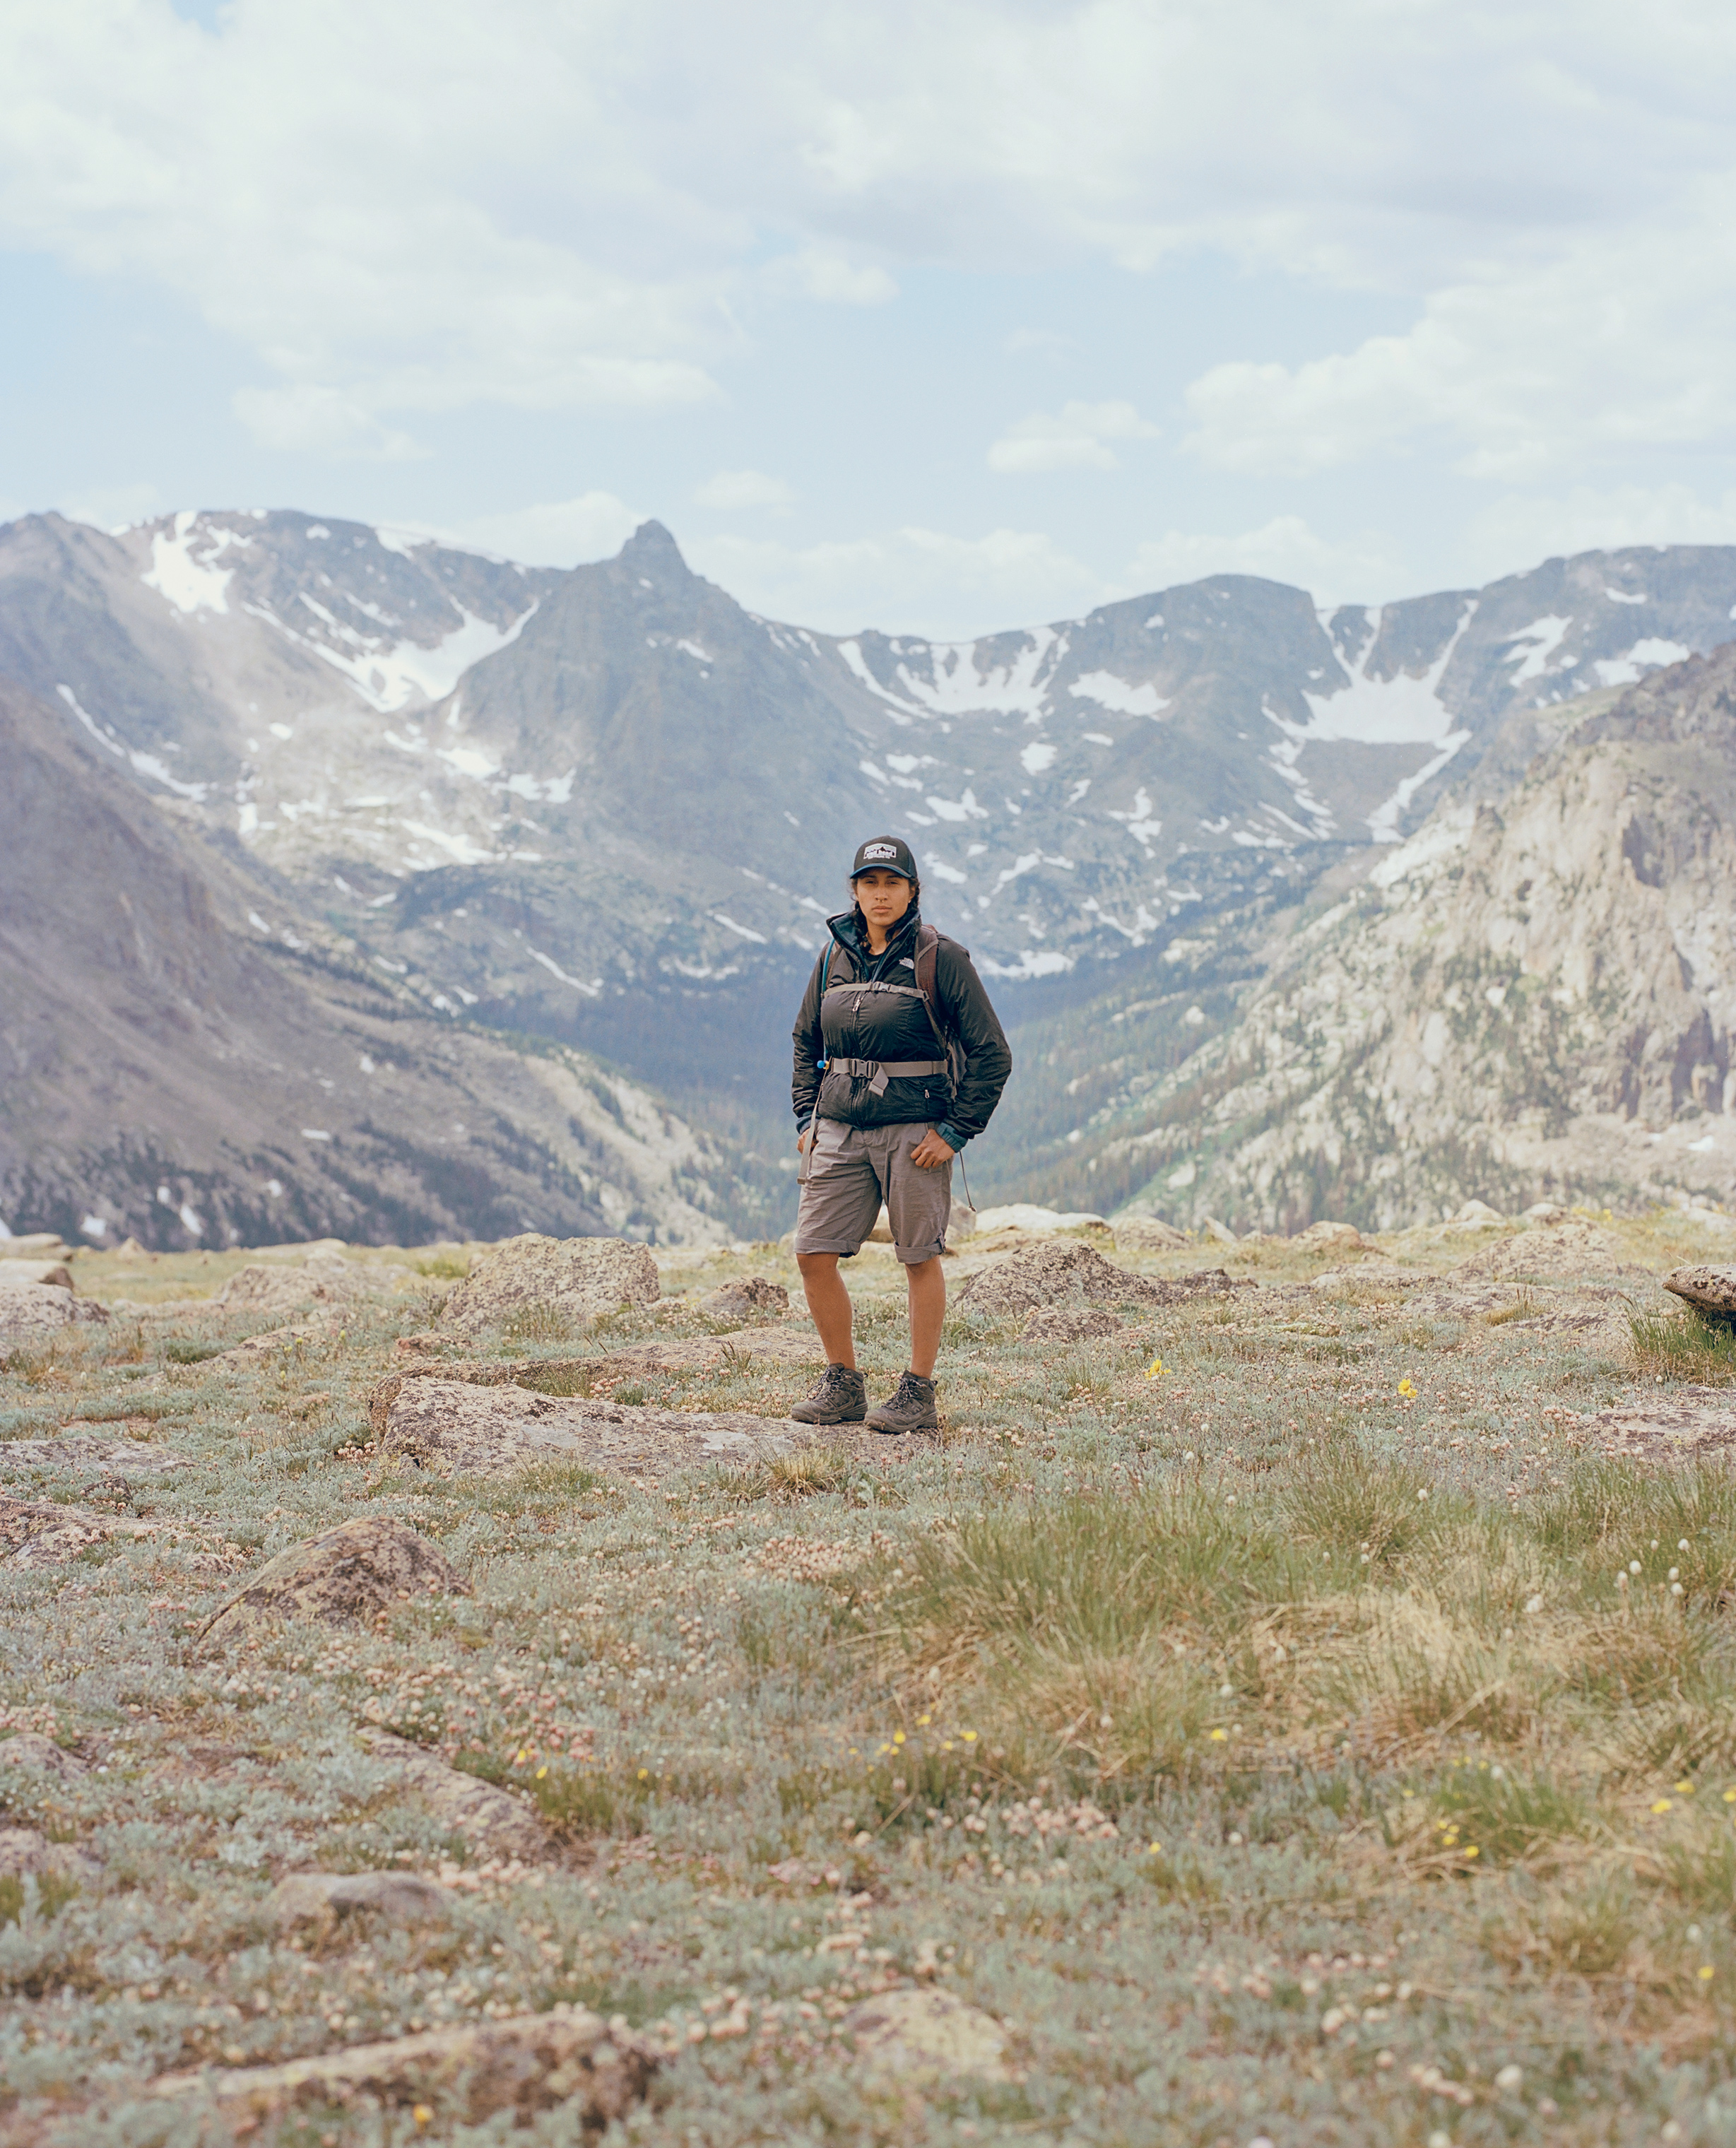 Aileen Palma at Forest Canyon Overlook in Rocky Mountain National Park, June 30, 2018. (Catherine Hyland for TIME)